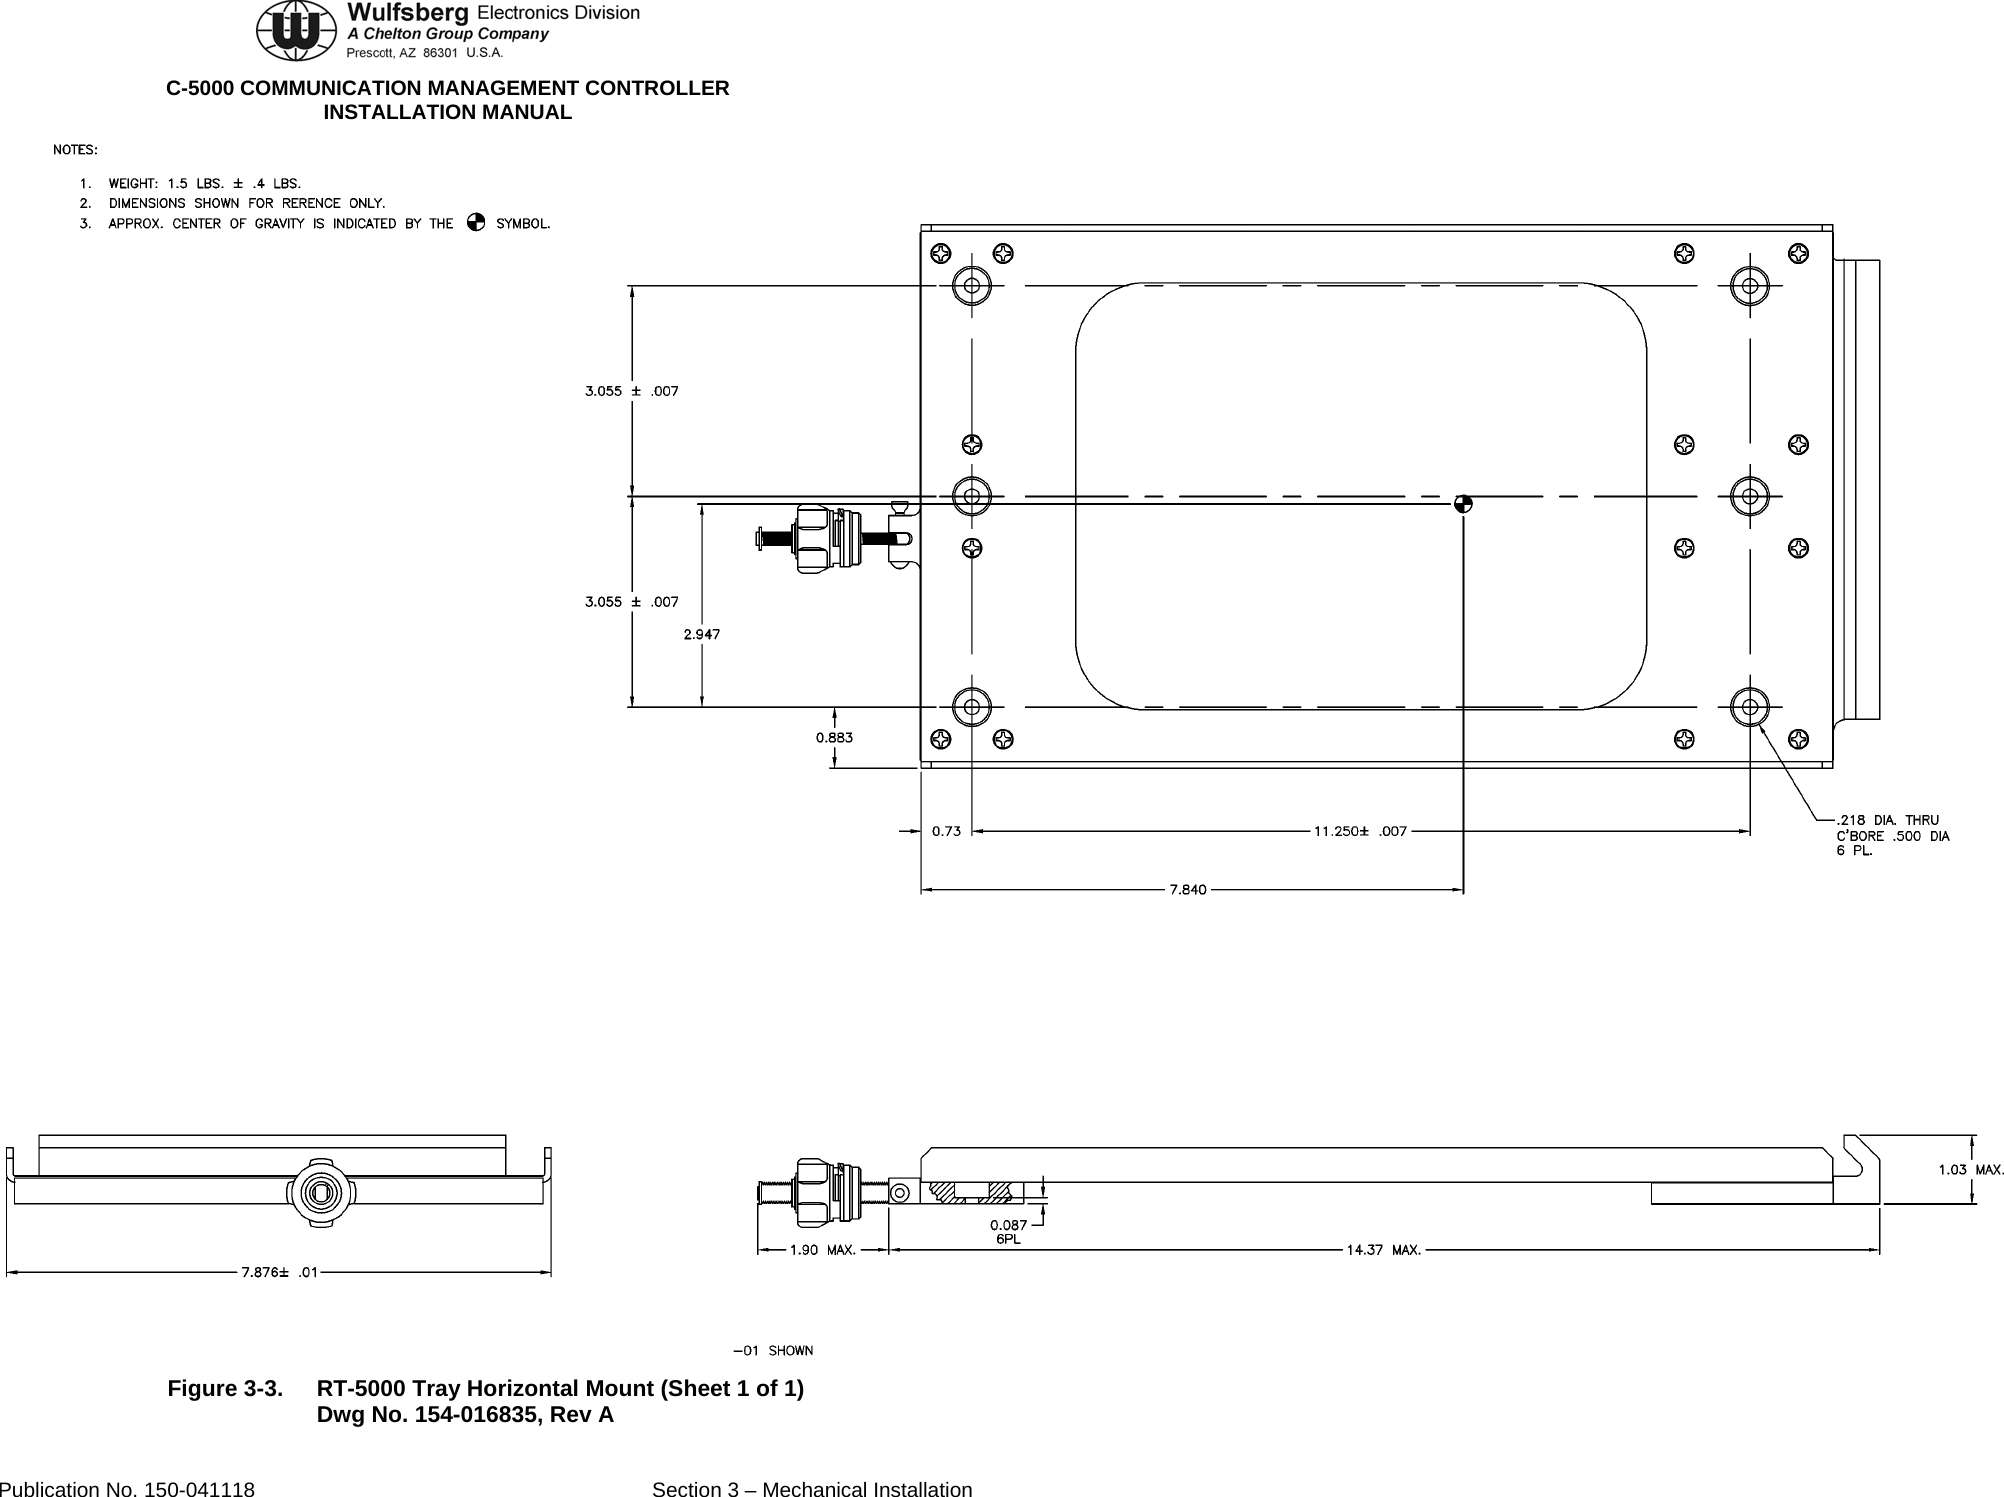  C-5000 COMMUNICATION MANAGEMENT CONTROLLER INSTALLATION MANUAL  Figure 3-3.  RT-5000 Tray Horizontal Mount (Sheet 1 of 1) Dwg No. 154-016835, Rev A Publication No. 150-041118  Section 3 – Mechanical Installation 